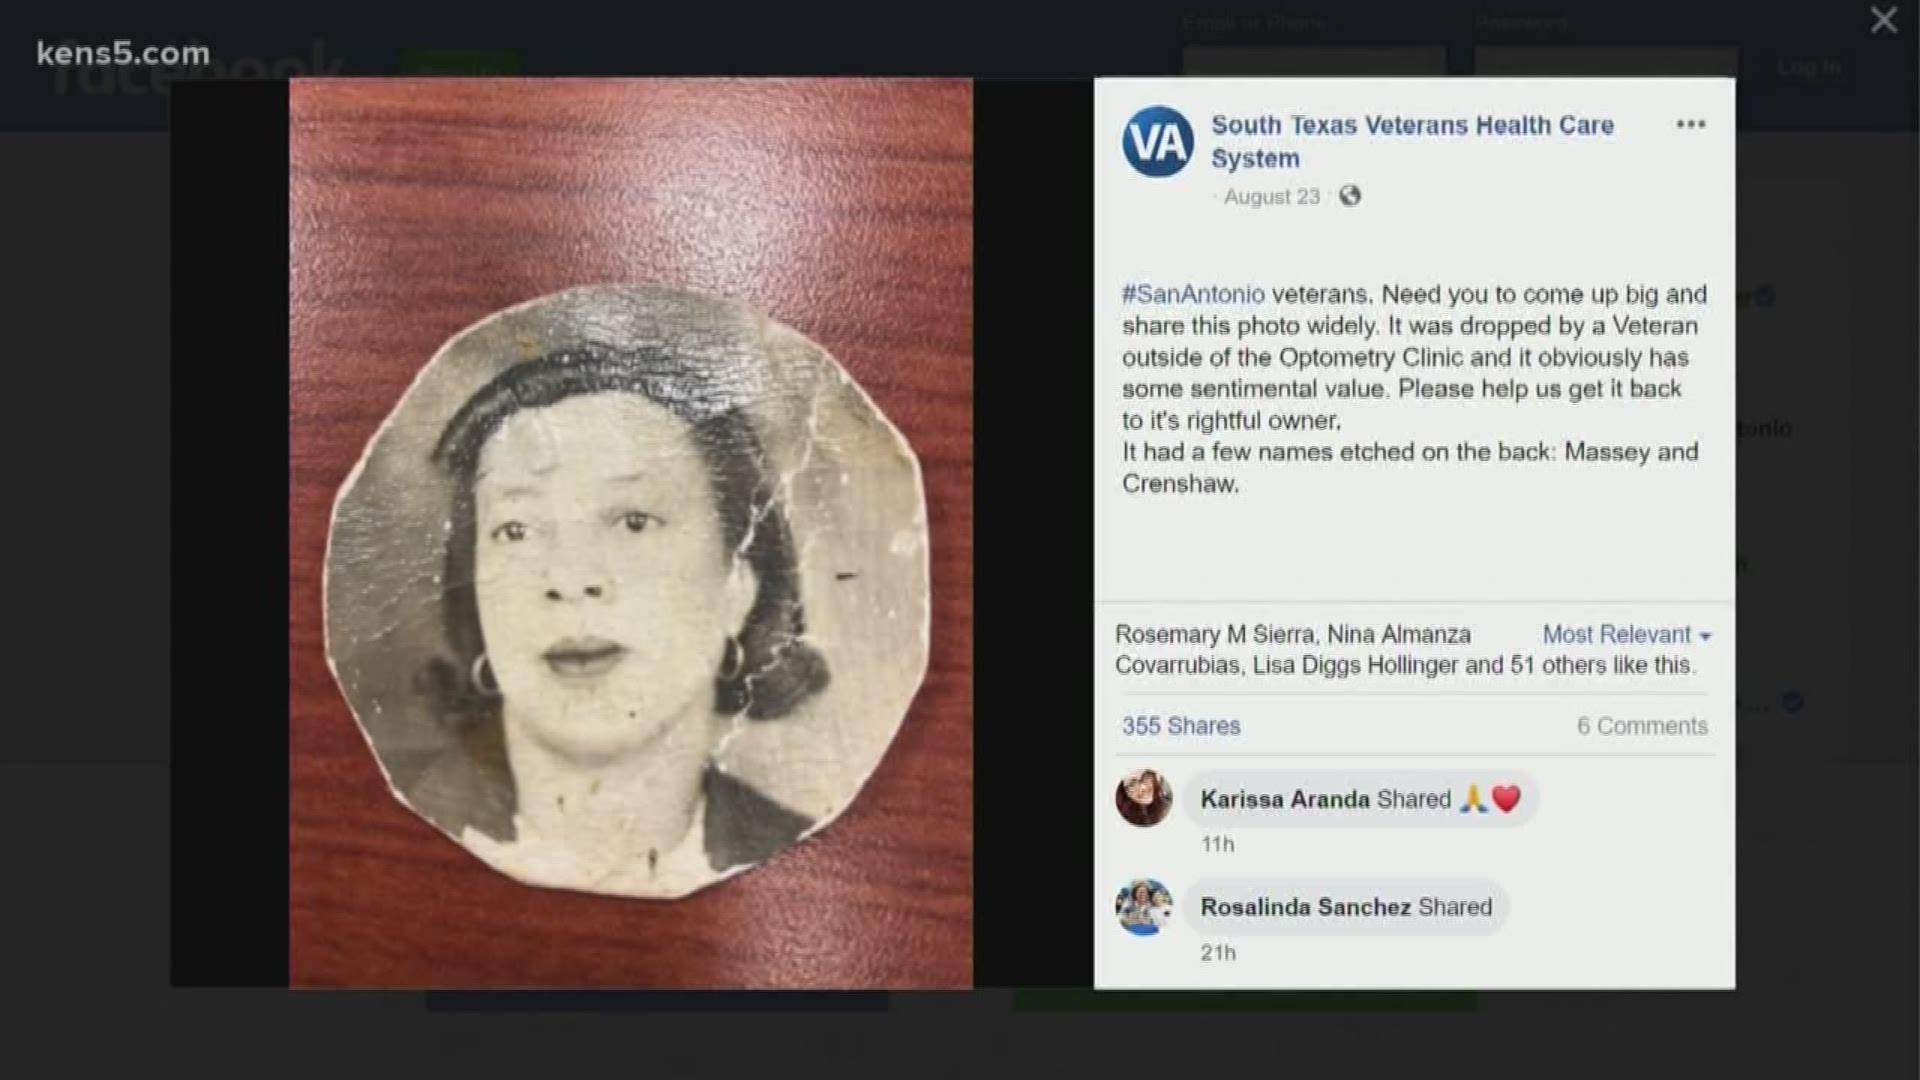 The photo was likely dropped by a veteran outside of the center's optometry clinic and "obviously has some sentimental value."